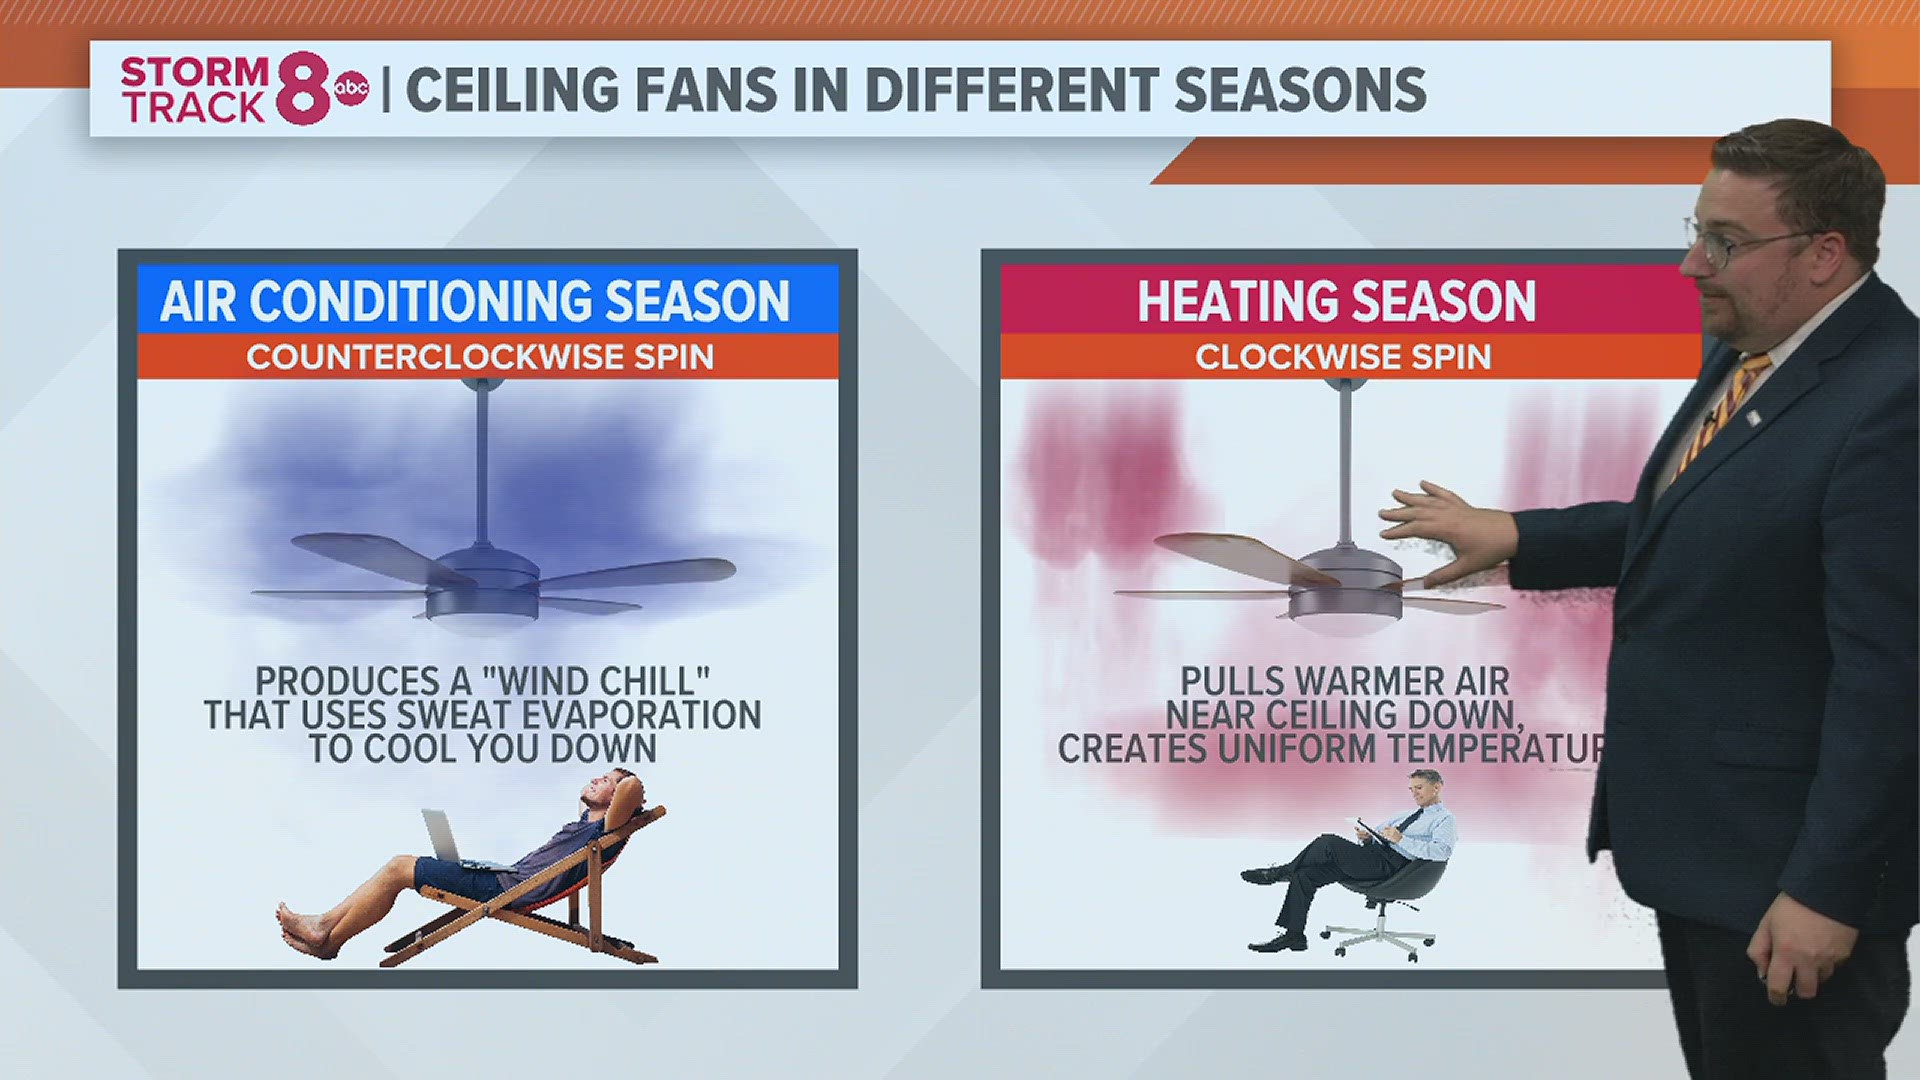 Ceiling fans will do more than cool you off in the summer. They can also help reduce your heating costs in the winter. Here's how.